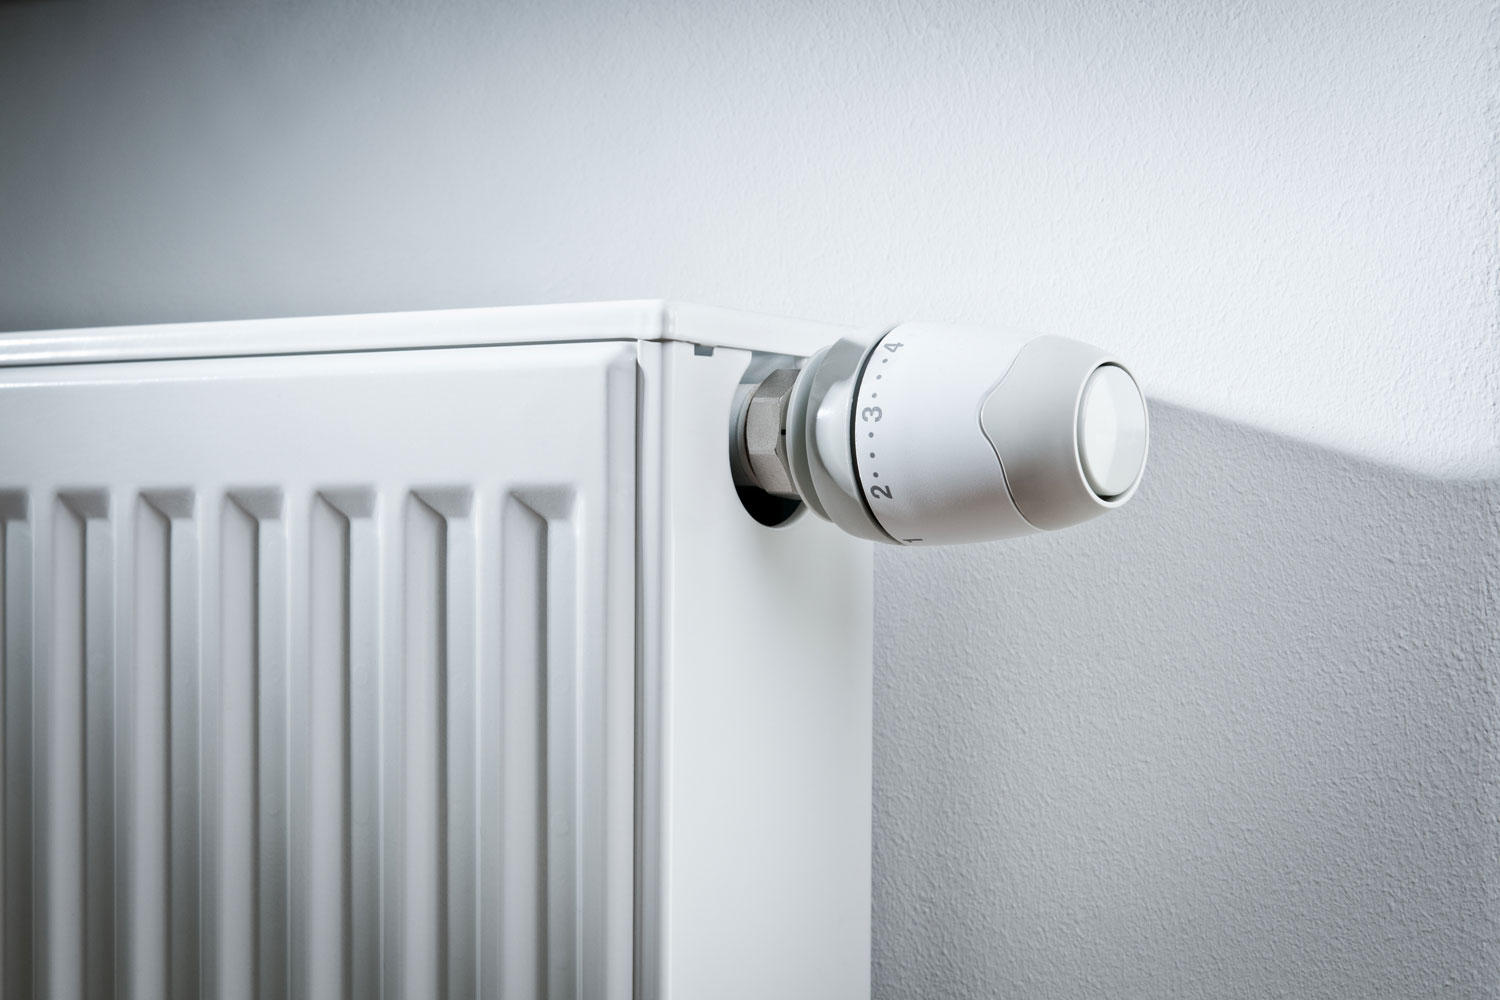 A wall heaters adjusting knob mounted on the side of the wall